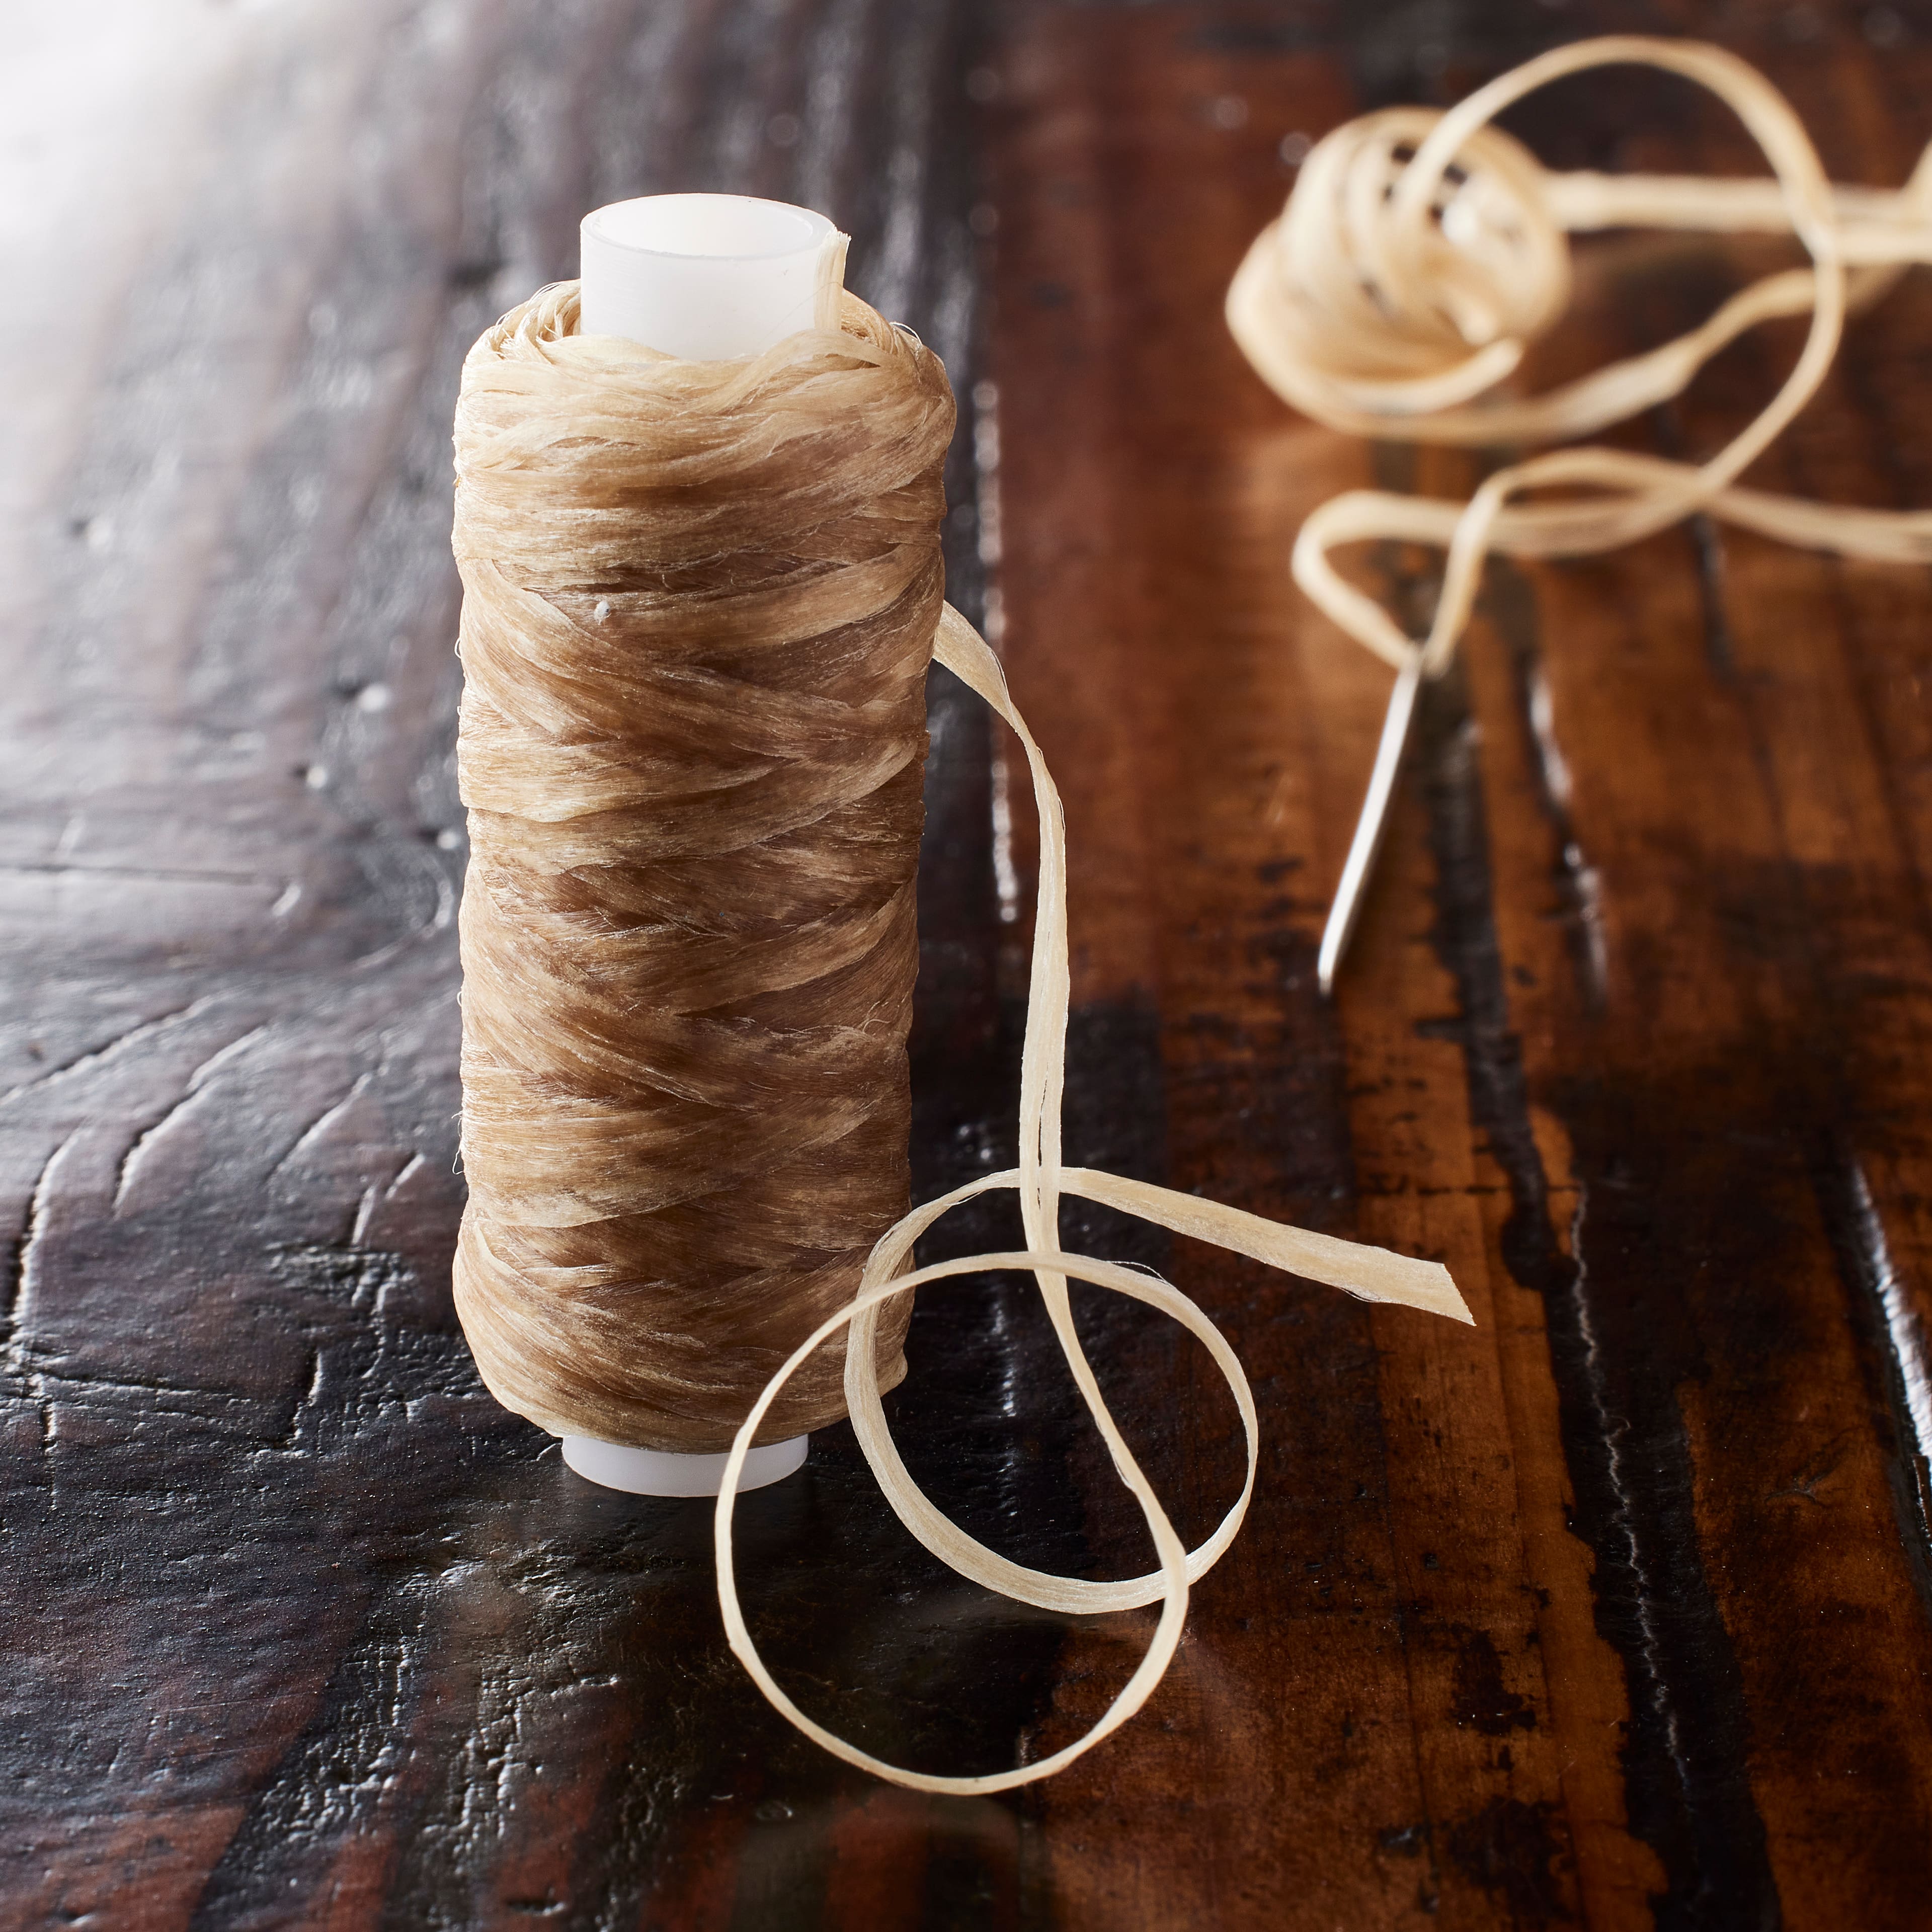 12 Pack: Natural Artificial Sinew Thread by Make Market®